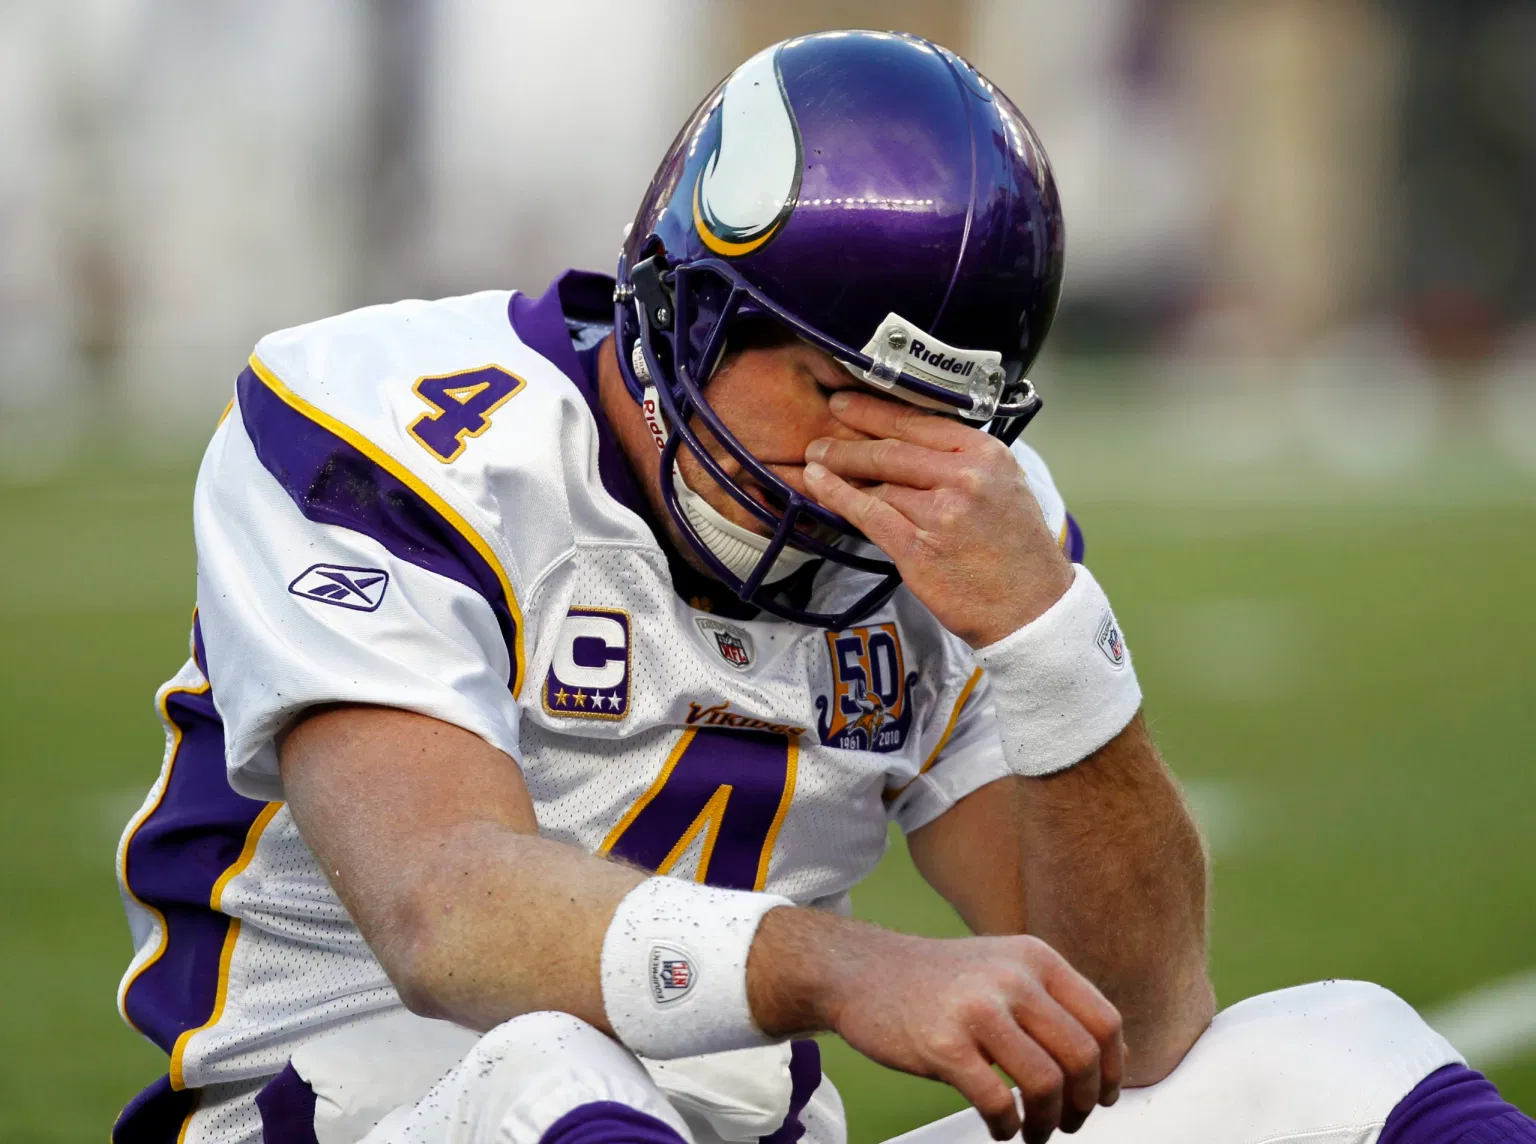 Brett Favre Joins Brock USA in Sports Injury Prevention Mission